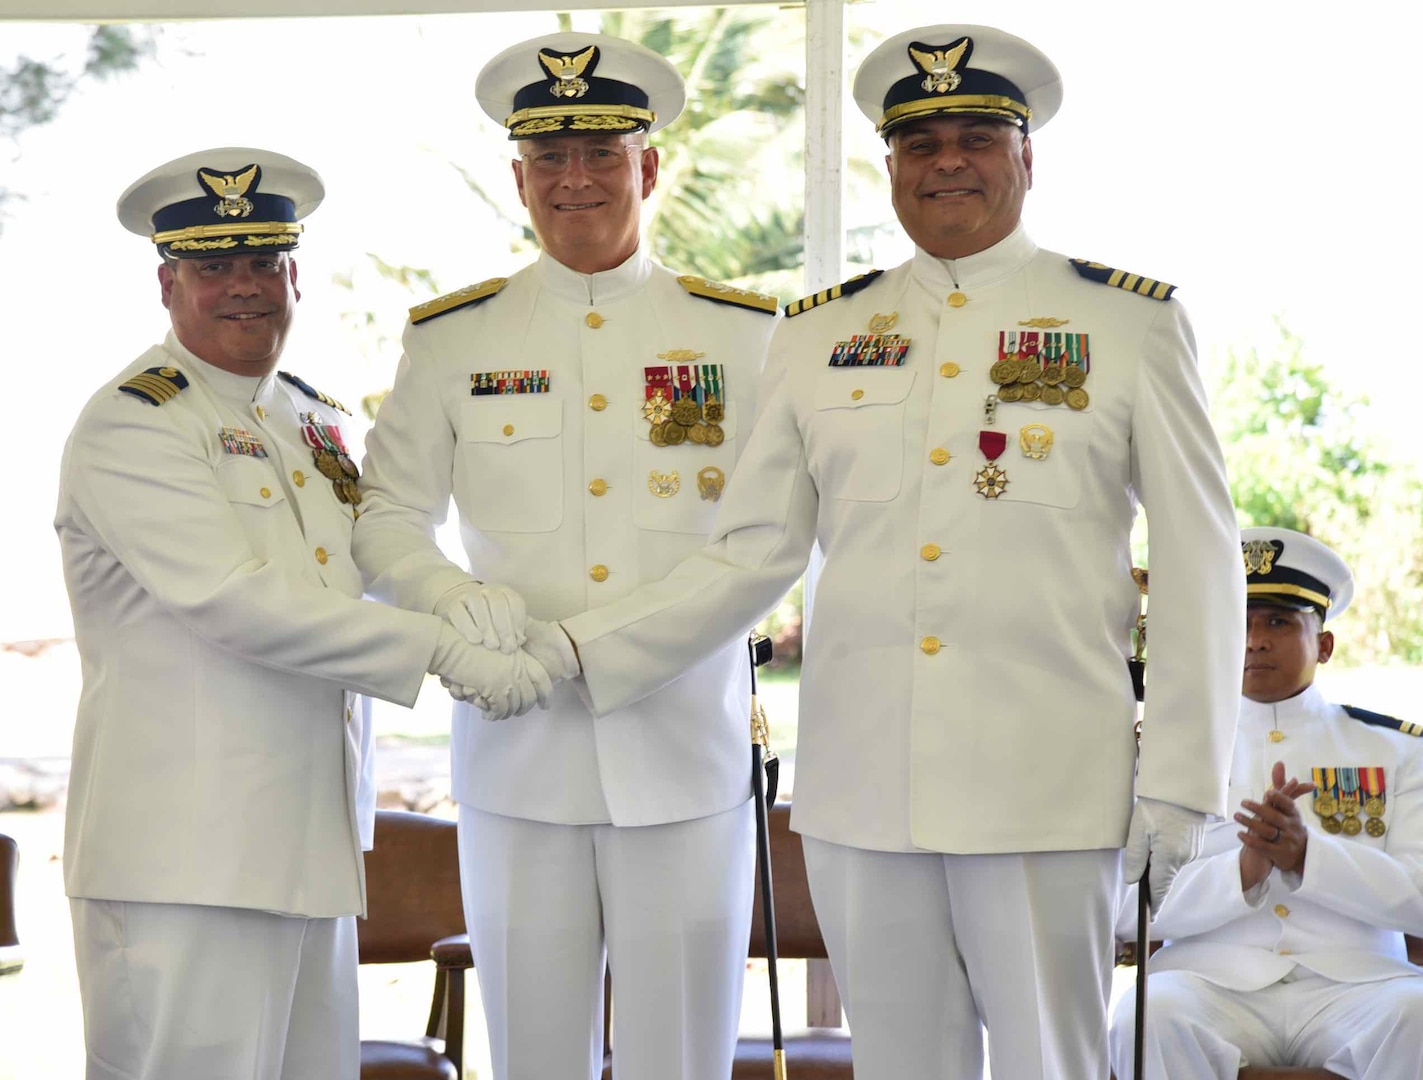 Capt. Luis J. Rodríguez (left), Rear Adm. Douglas M. Schofield (center) and Capt. José E. Díaz (right) following the transfer command authority during the Sector San Juan Change of Command Ceremony in San Juan, Puerto Rico June 13, 2024. During the ceremony, Capt. Rodríguez relieved Capt. Díaz as the commander of Sector San Juan. Capt. Rodríguez will be responsible for leading Coast Guard forces in Puerto Rico and the U.S. Virgin Islands and the oversight of a 1.3 million square nautical mile area of responsibility in the Eastern Caribbean. (Coast Guard photo by Ricardo Castrodad)